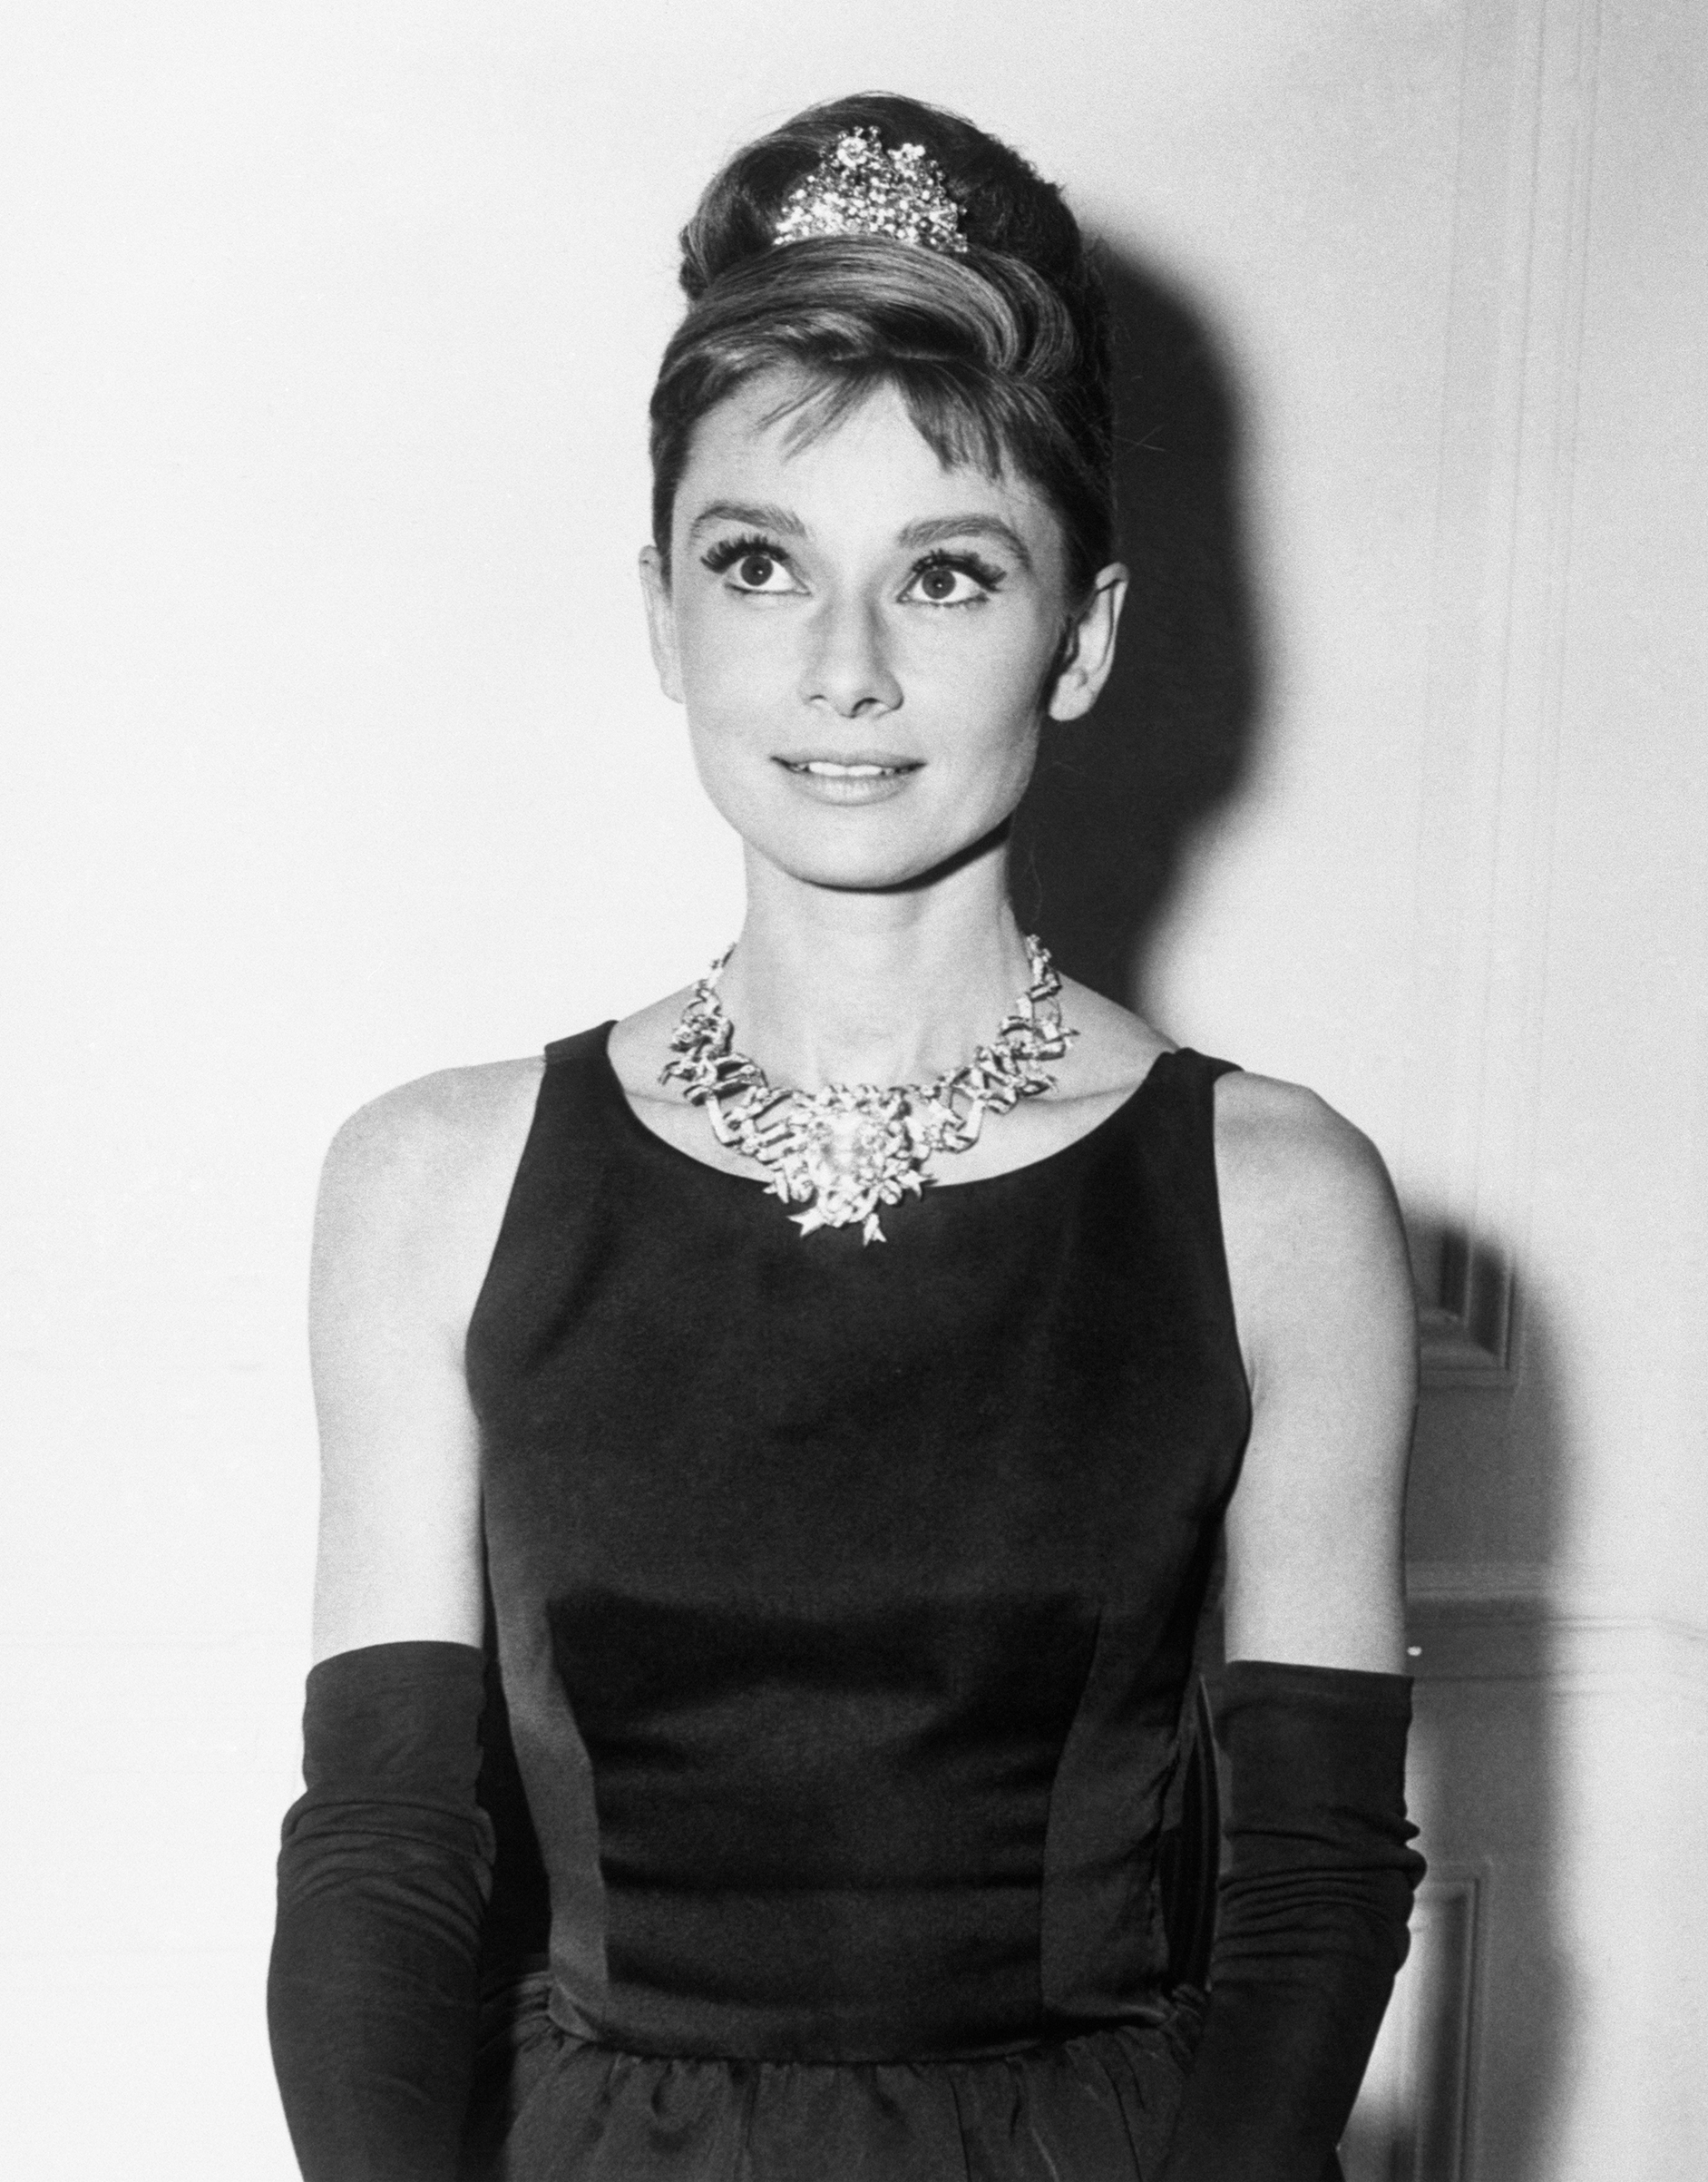 Audrey Hepburn, about to begin filming for Breakfast At Tiffany's, wears one of the store's most expensive diamond necklaces. (Bettmann Archive/Getty Images)